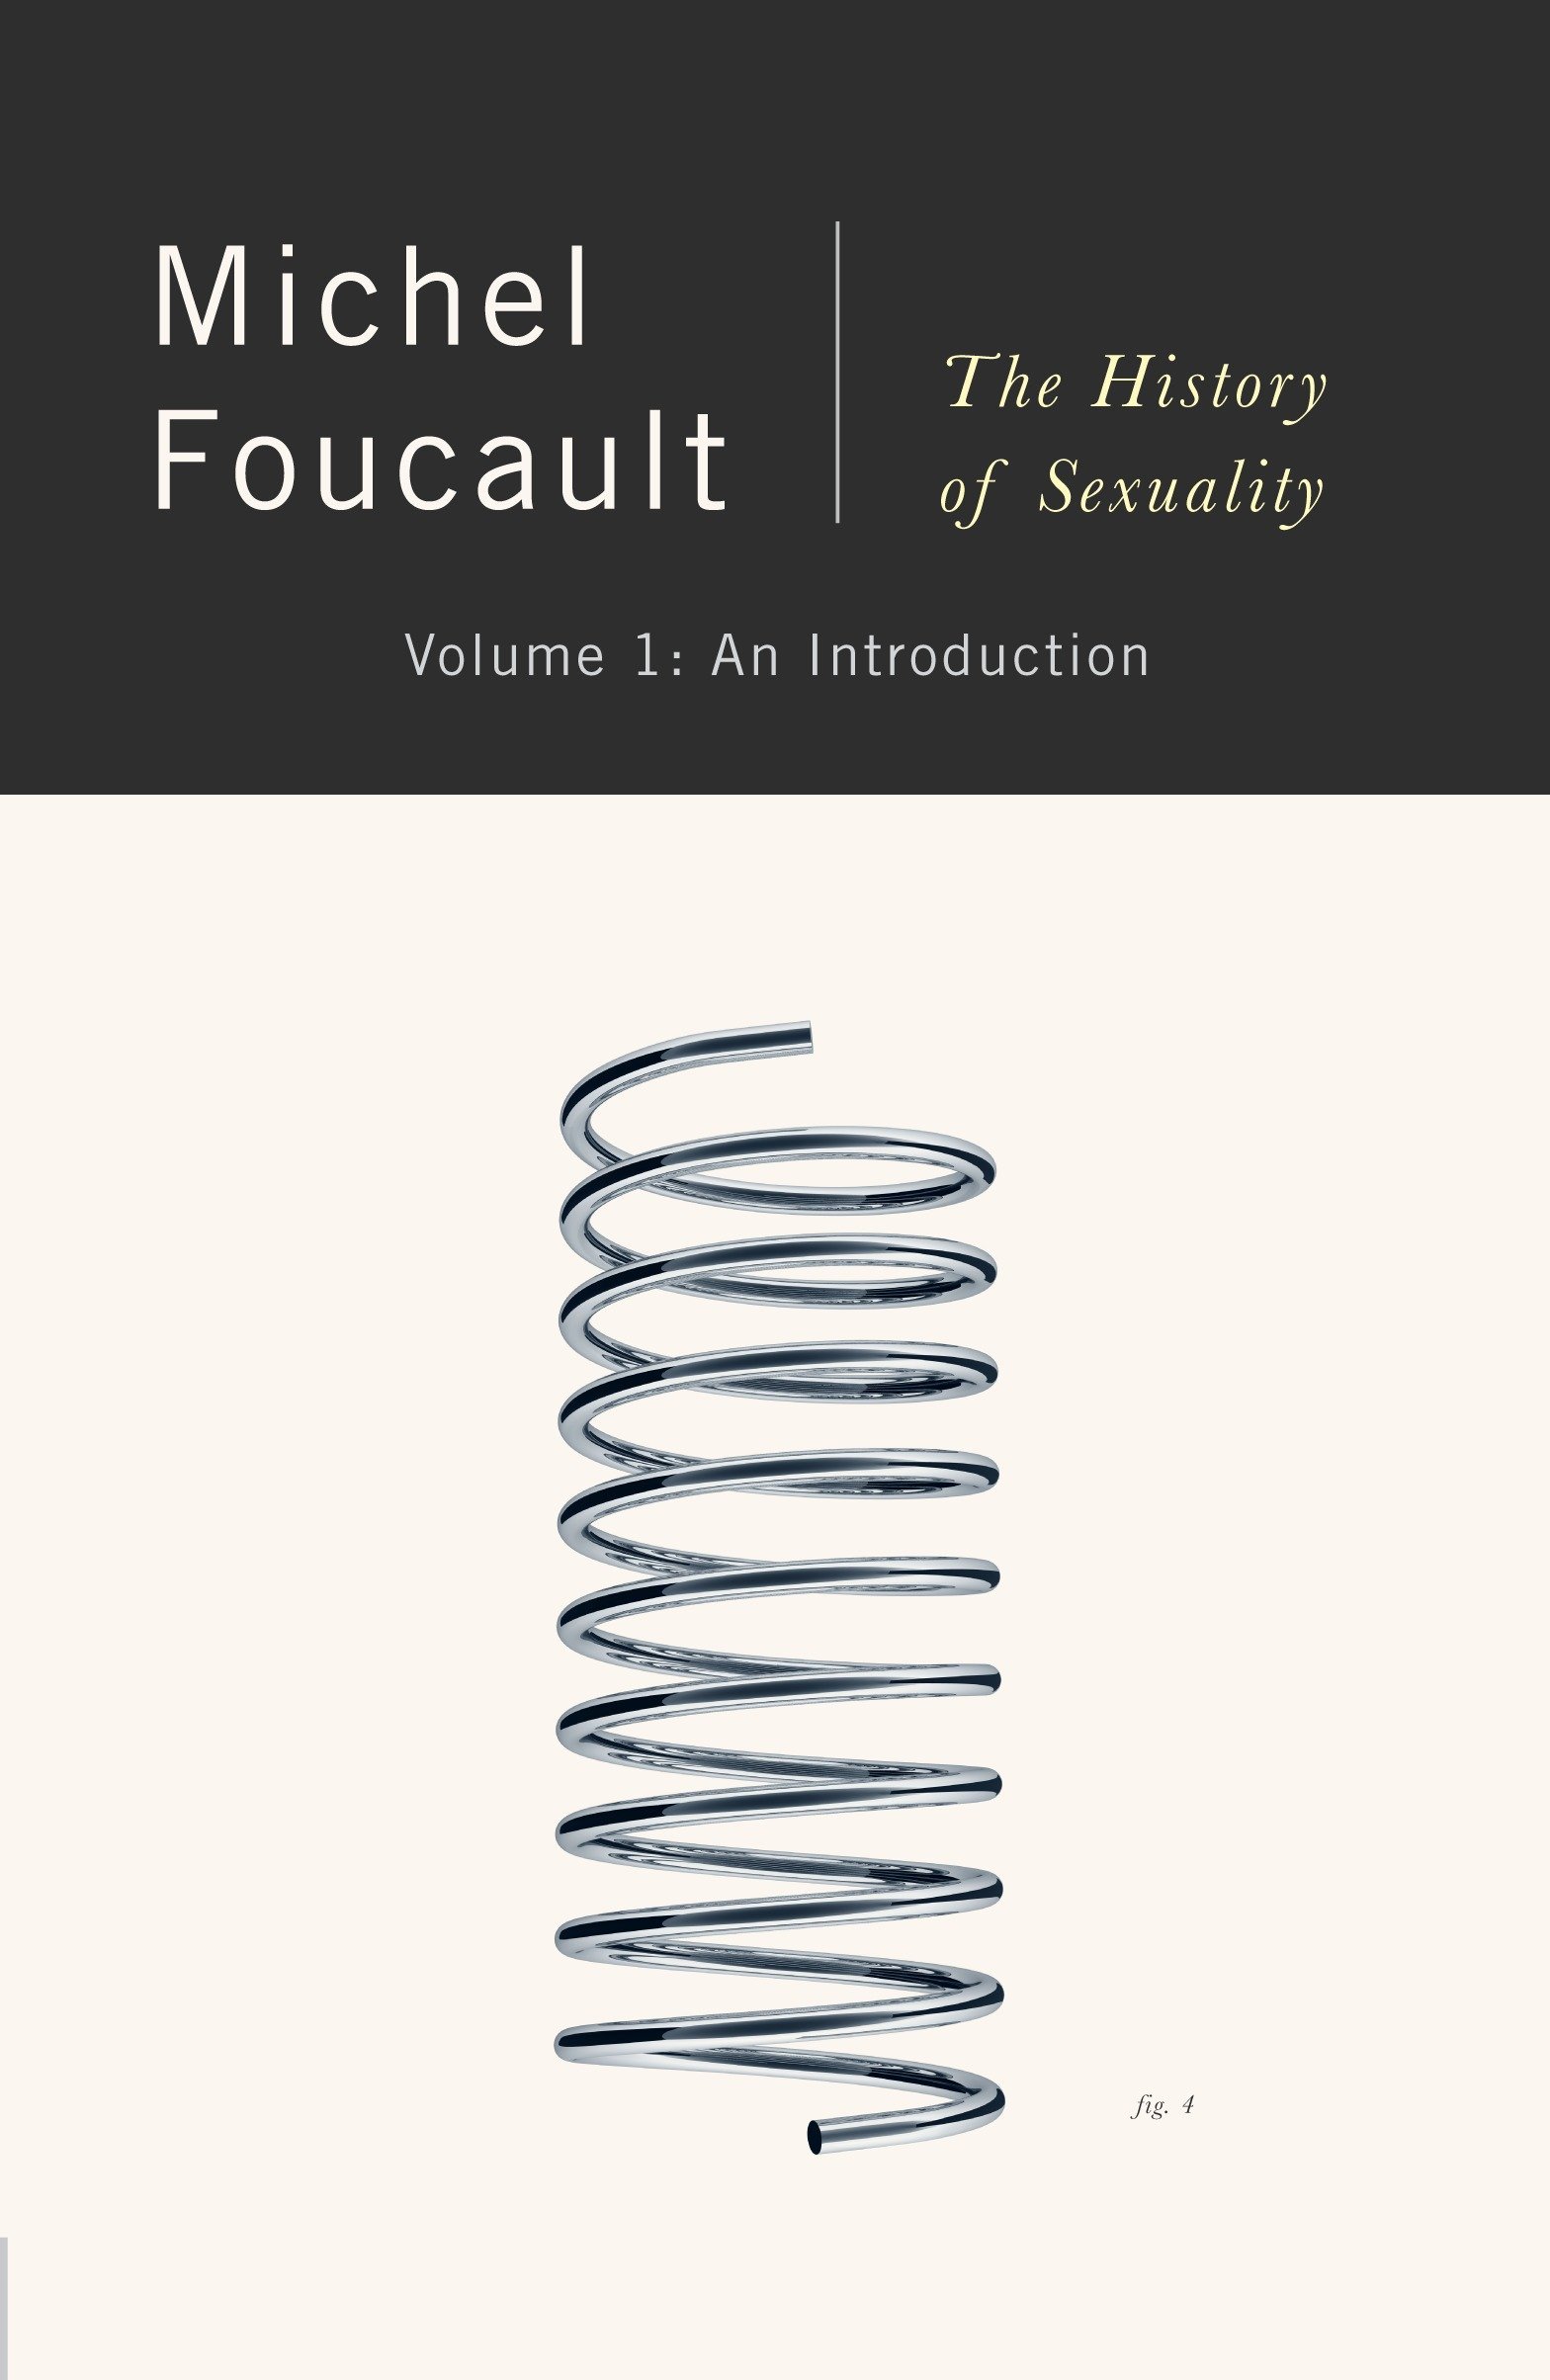 Book Notice: THE HISTORY OF SEXUALITY (4 VOLUMES), by Michel Foucault